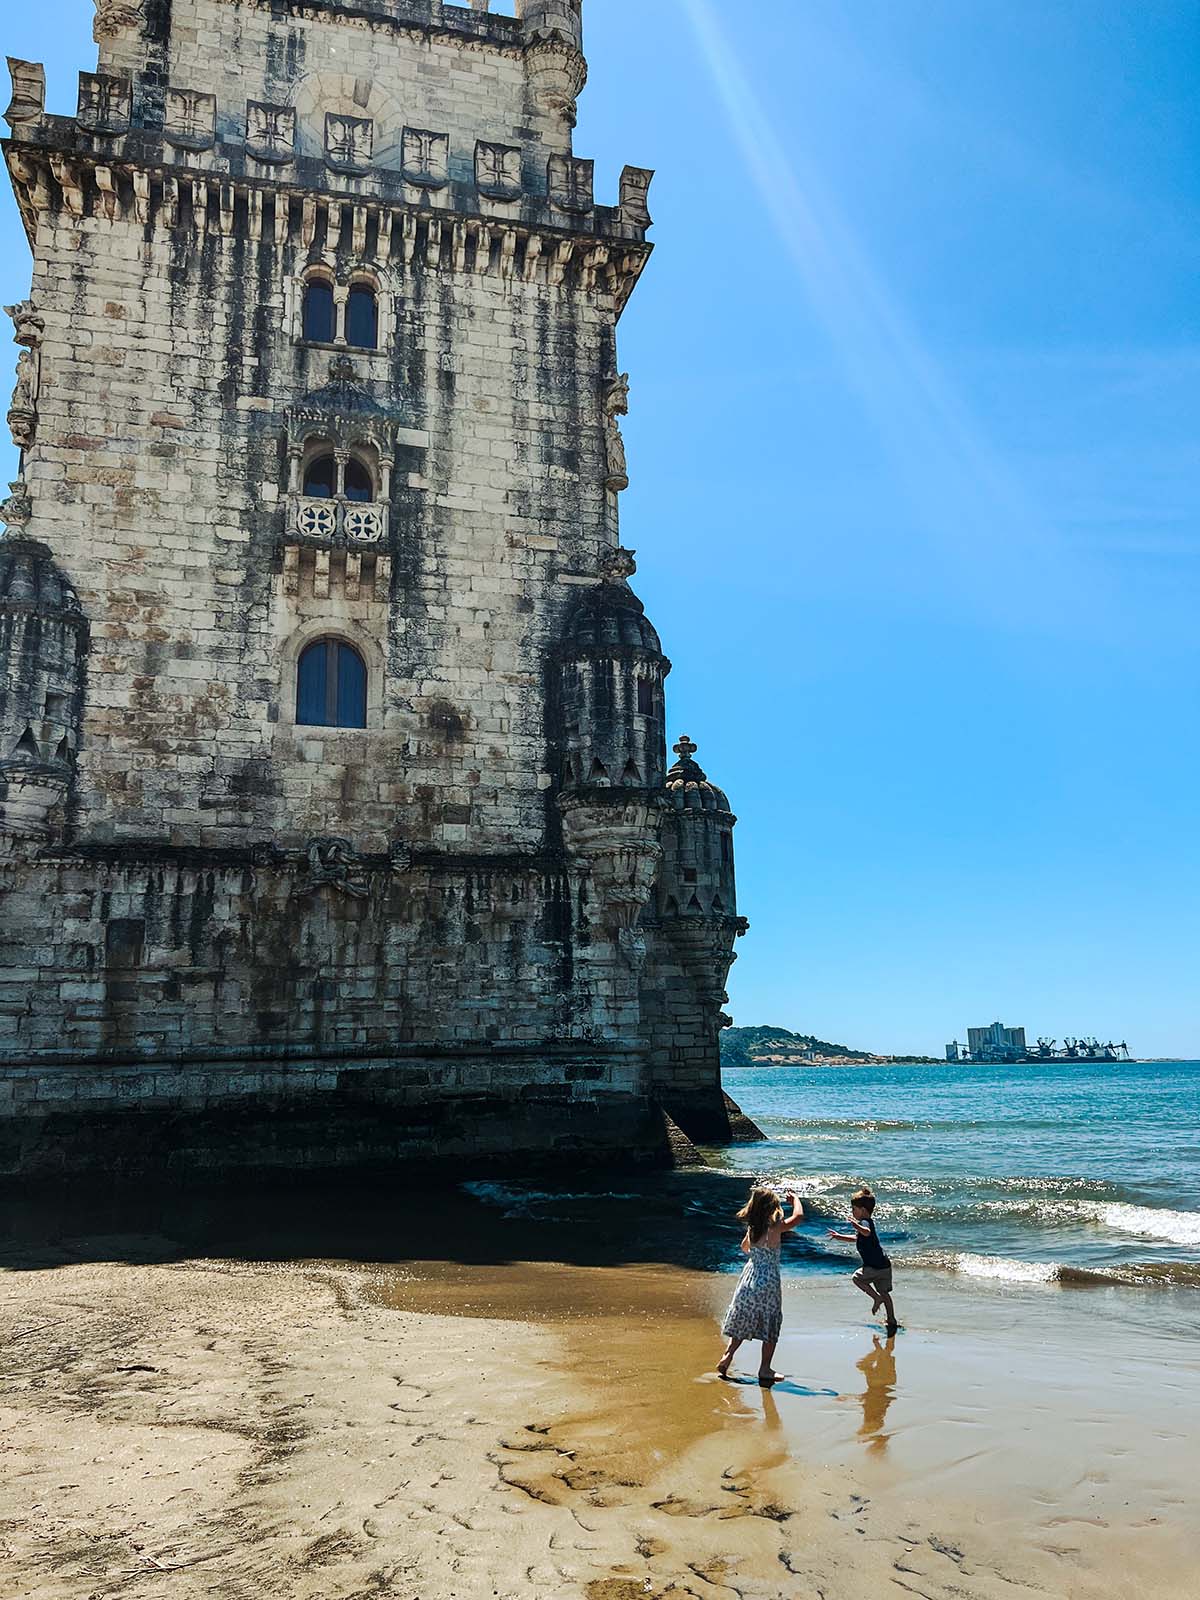 Kids playing in the water at Belem.